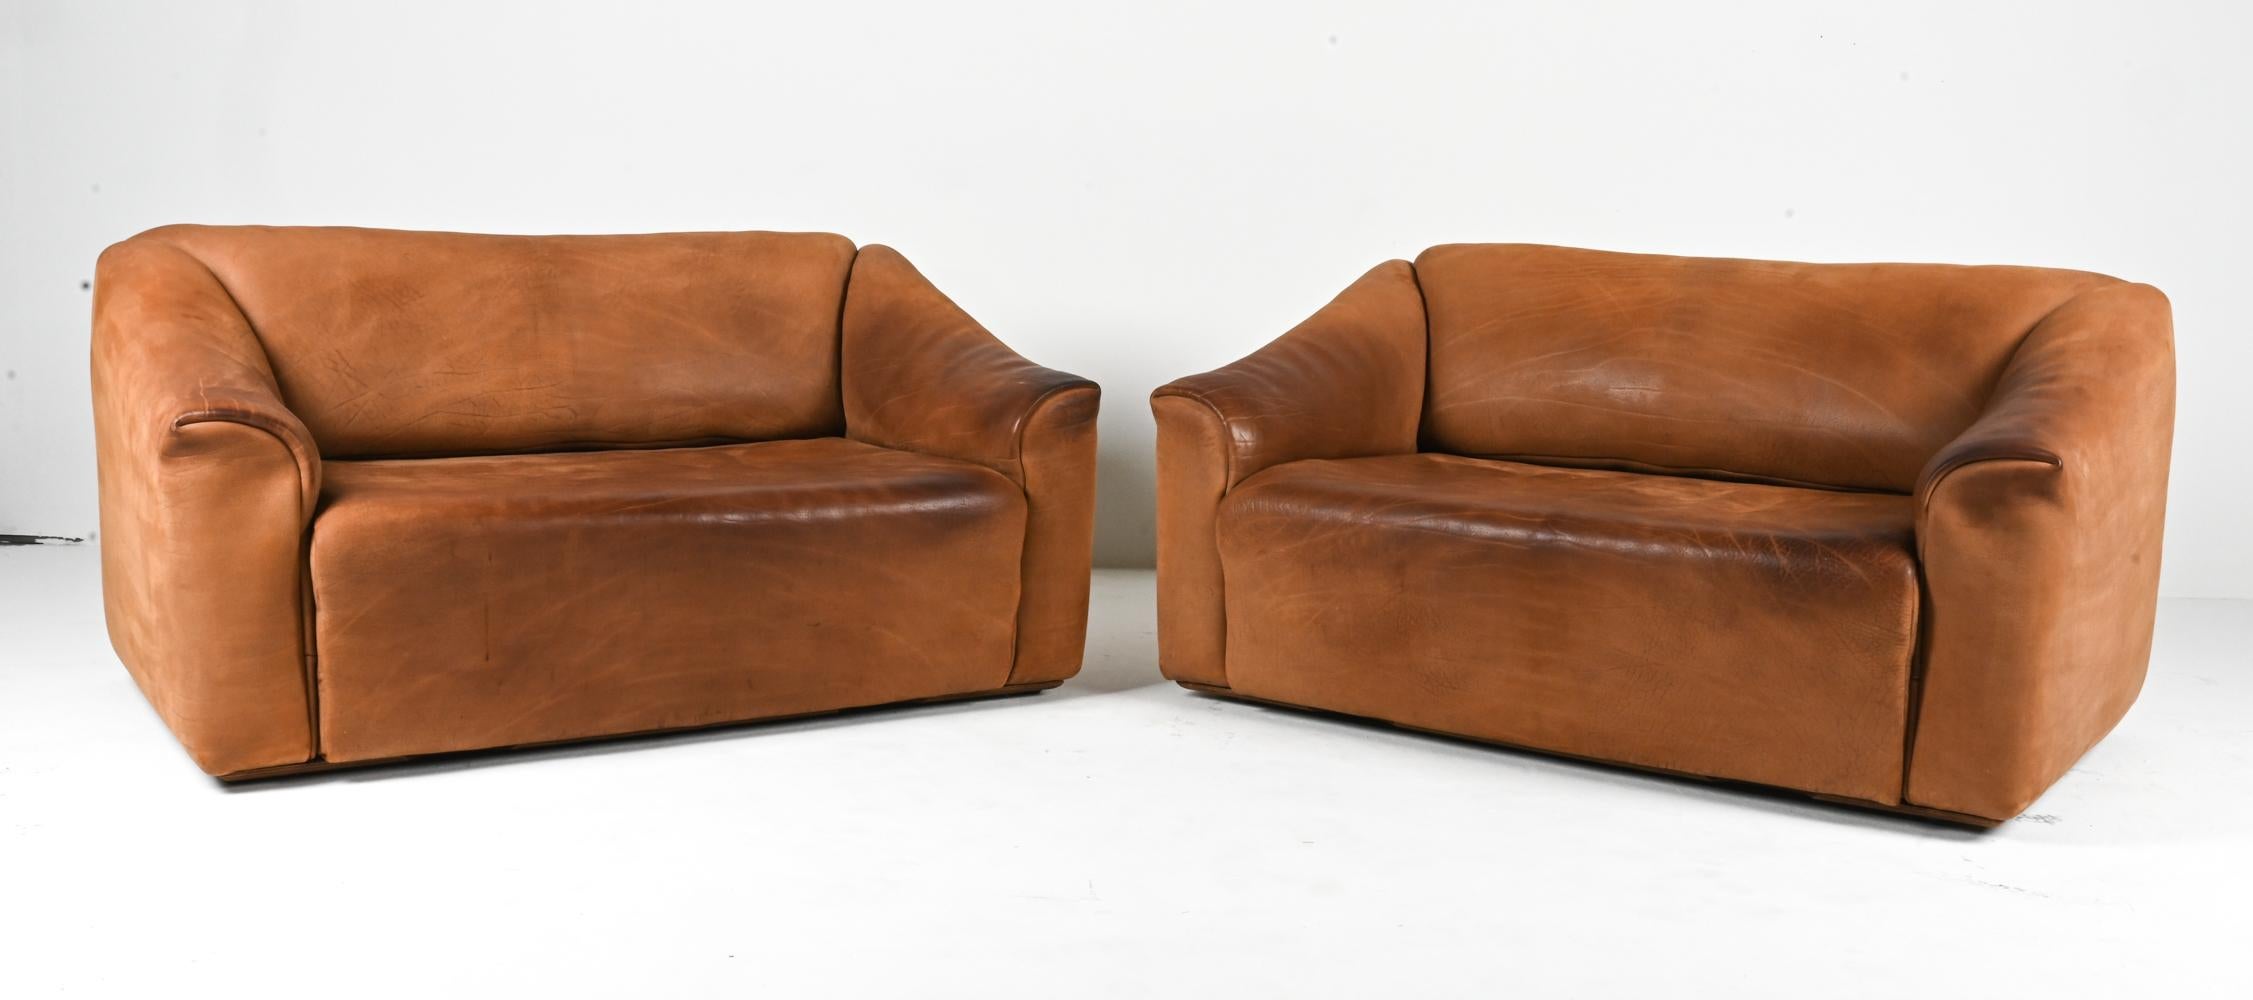 Swiss Pair of De Sede DS-47 Two-Seat Sofas in Nubuck Leather, c. 1970's For Sale